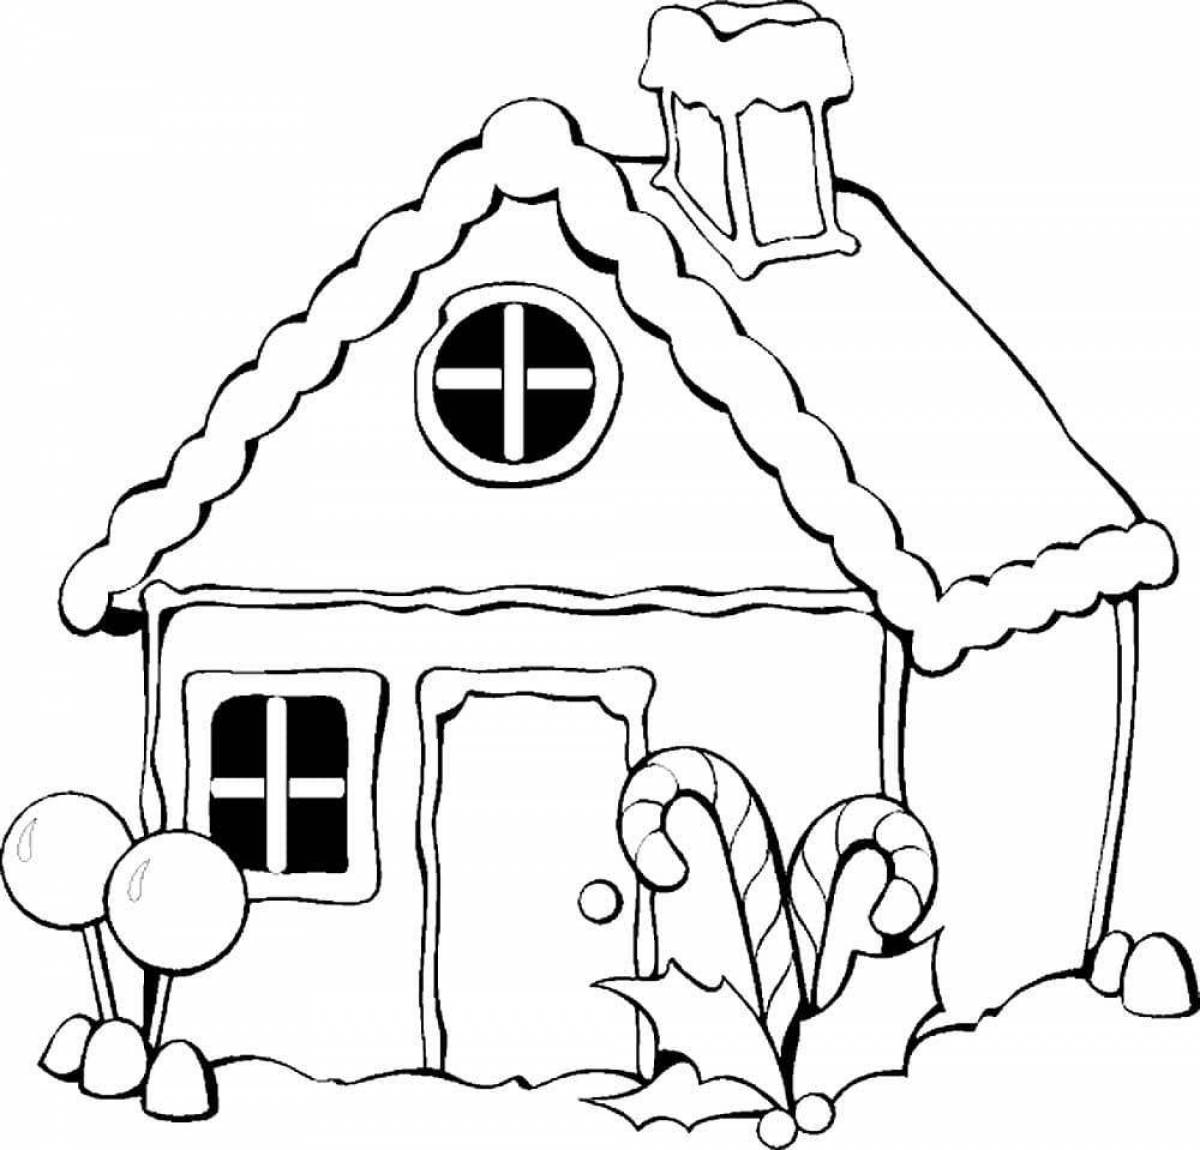 Coloring book shining fairy house